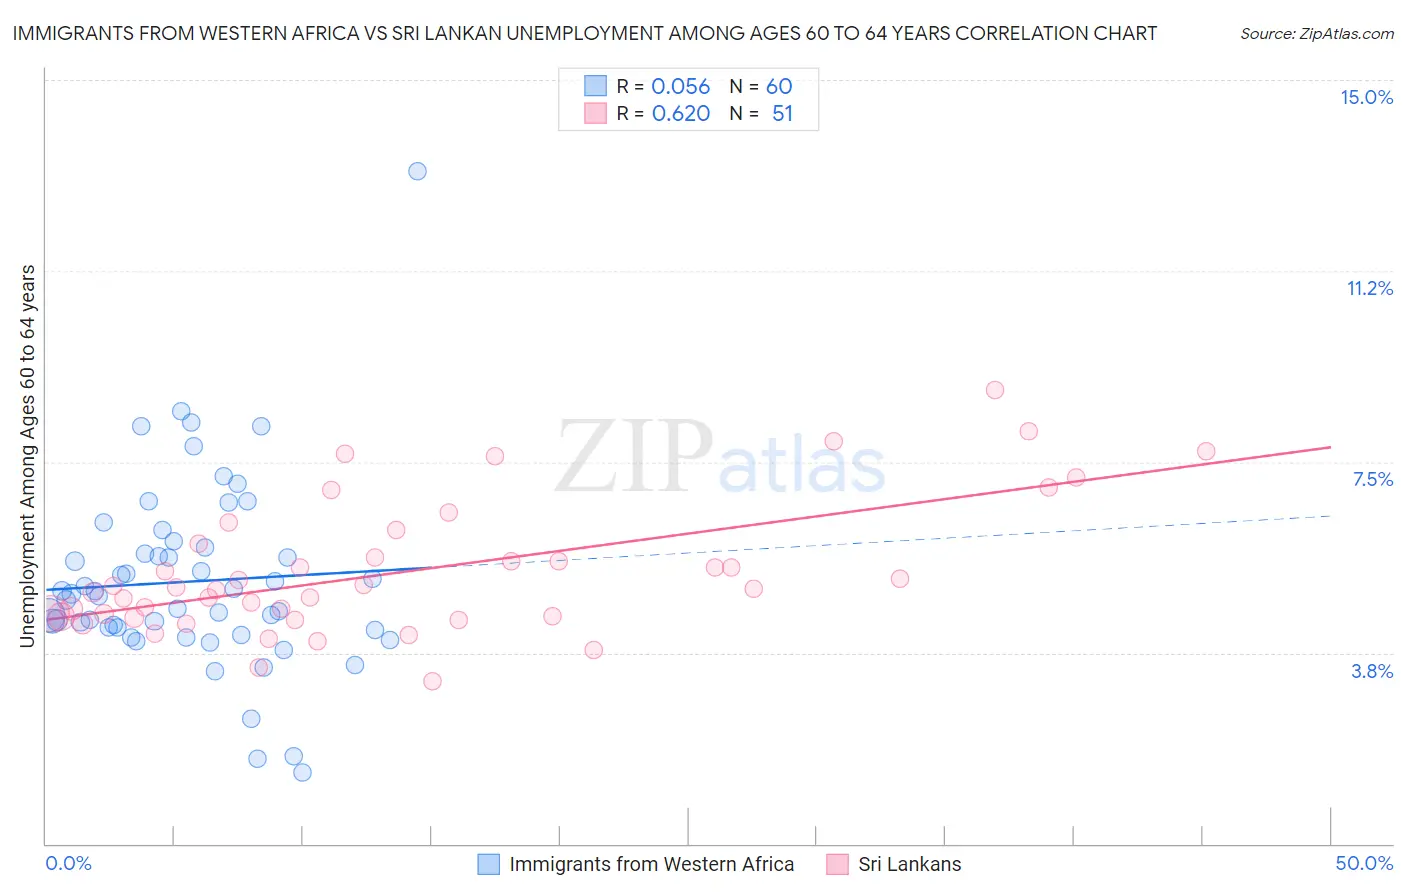 Immigrants from Western Africa vs Sri Lankan Unemployment Among Ages 60 to 64 years